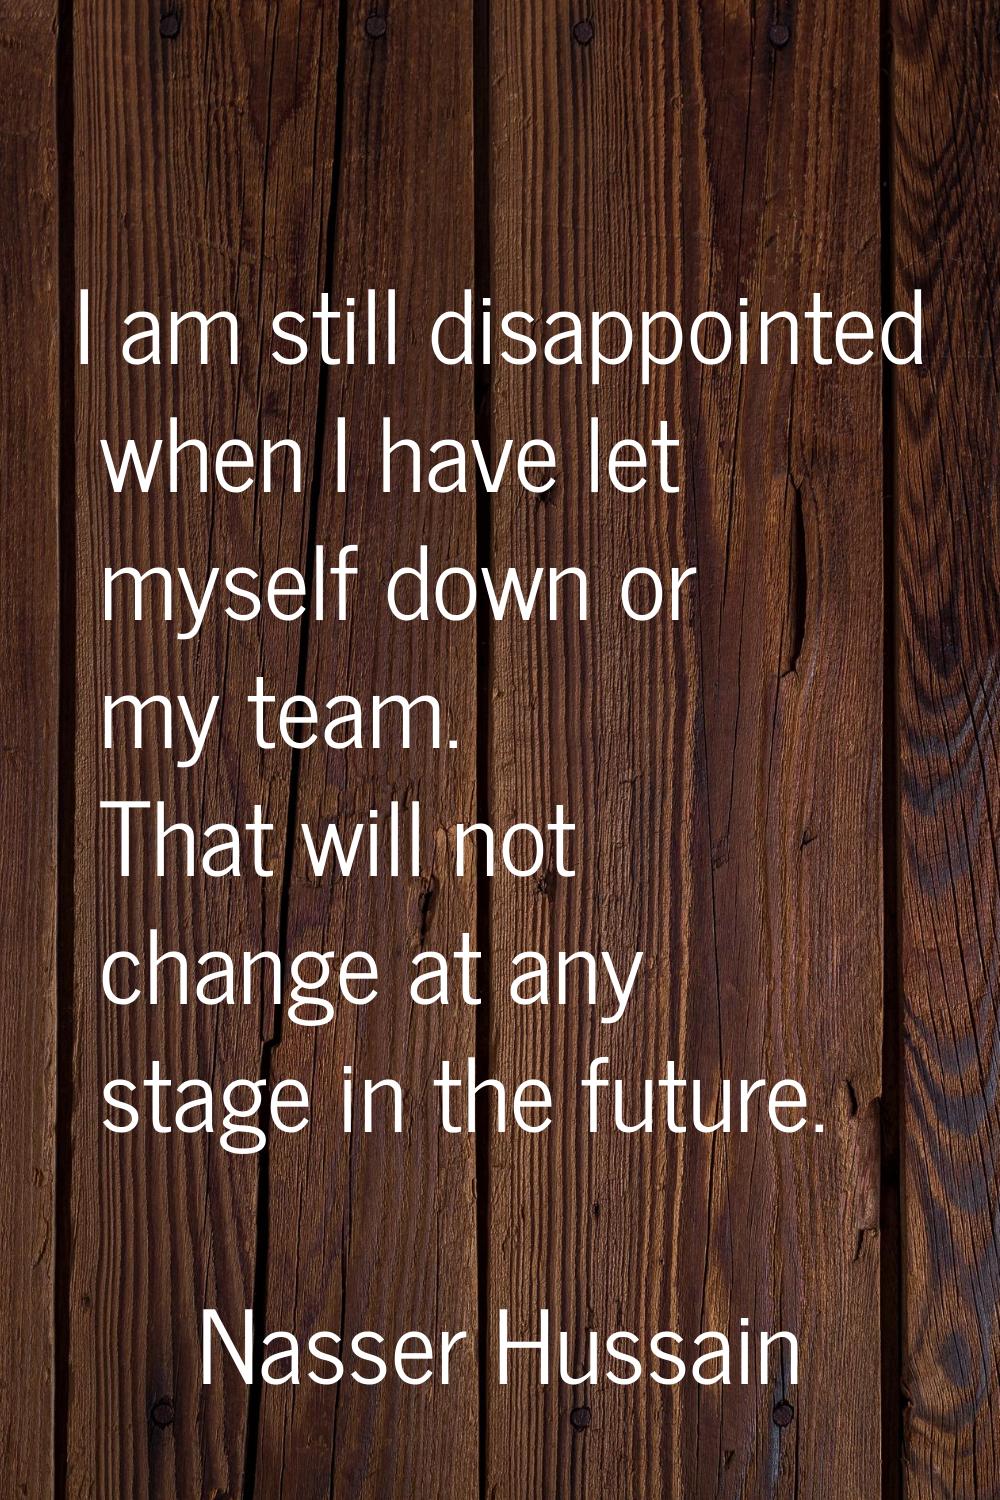 I am still disappointed when I have let myself down or my team. That will not change at any stage i